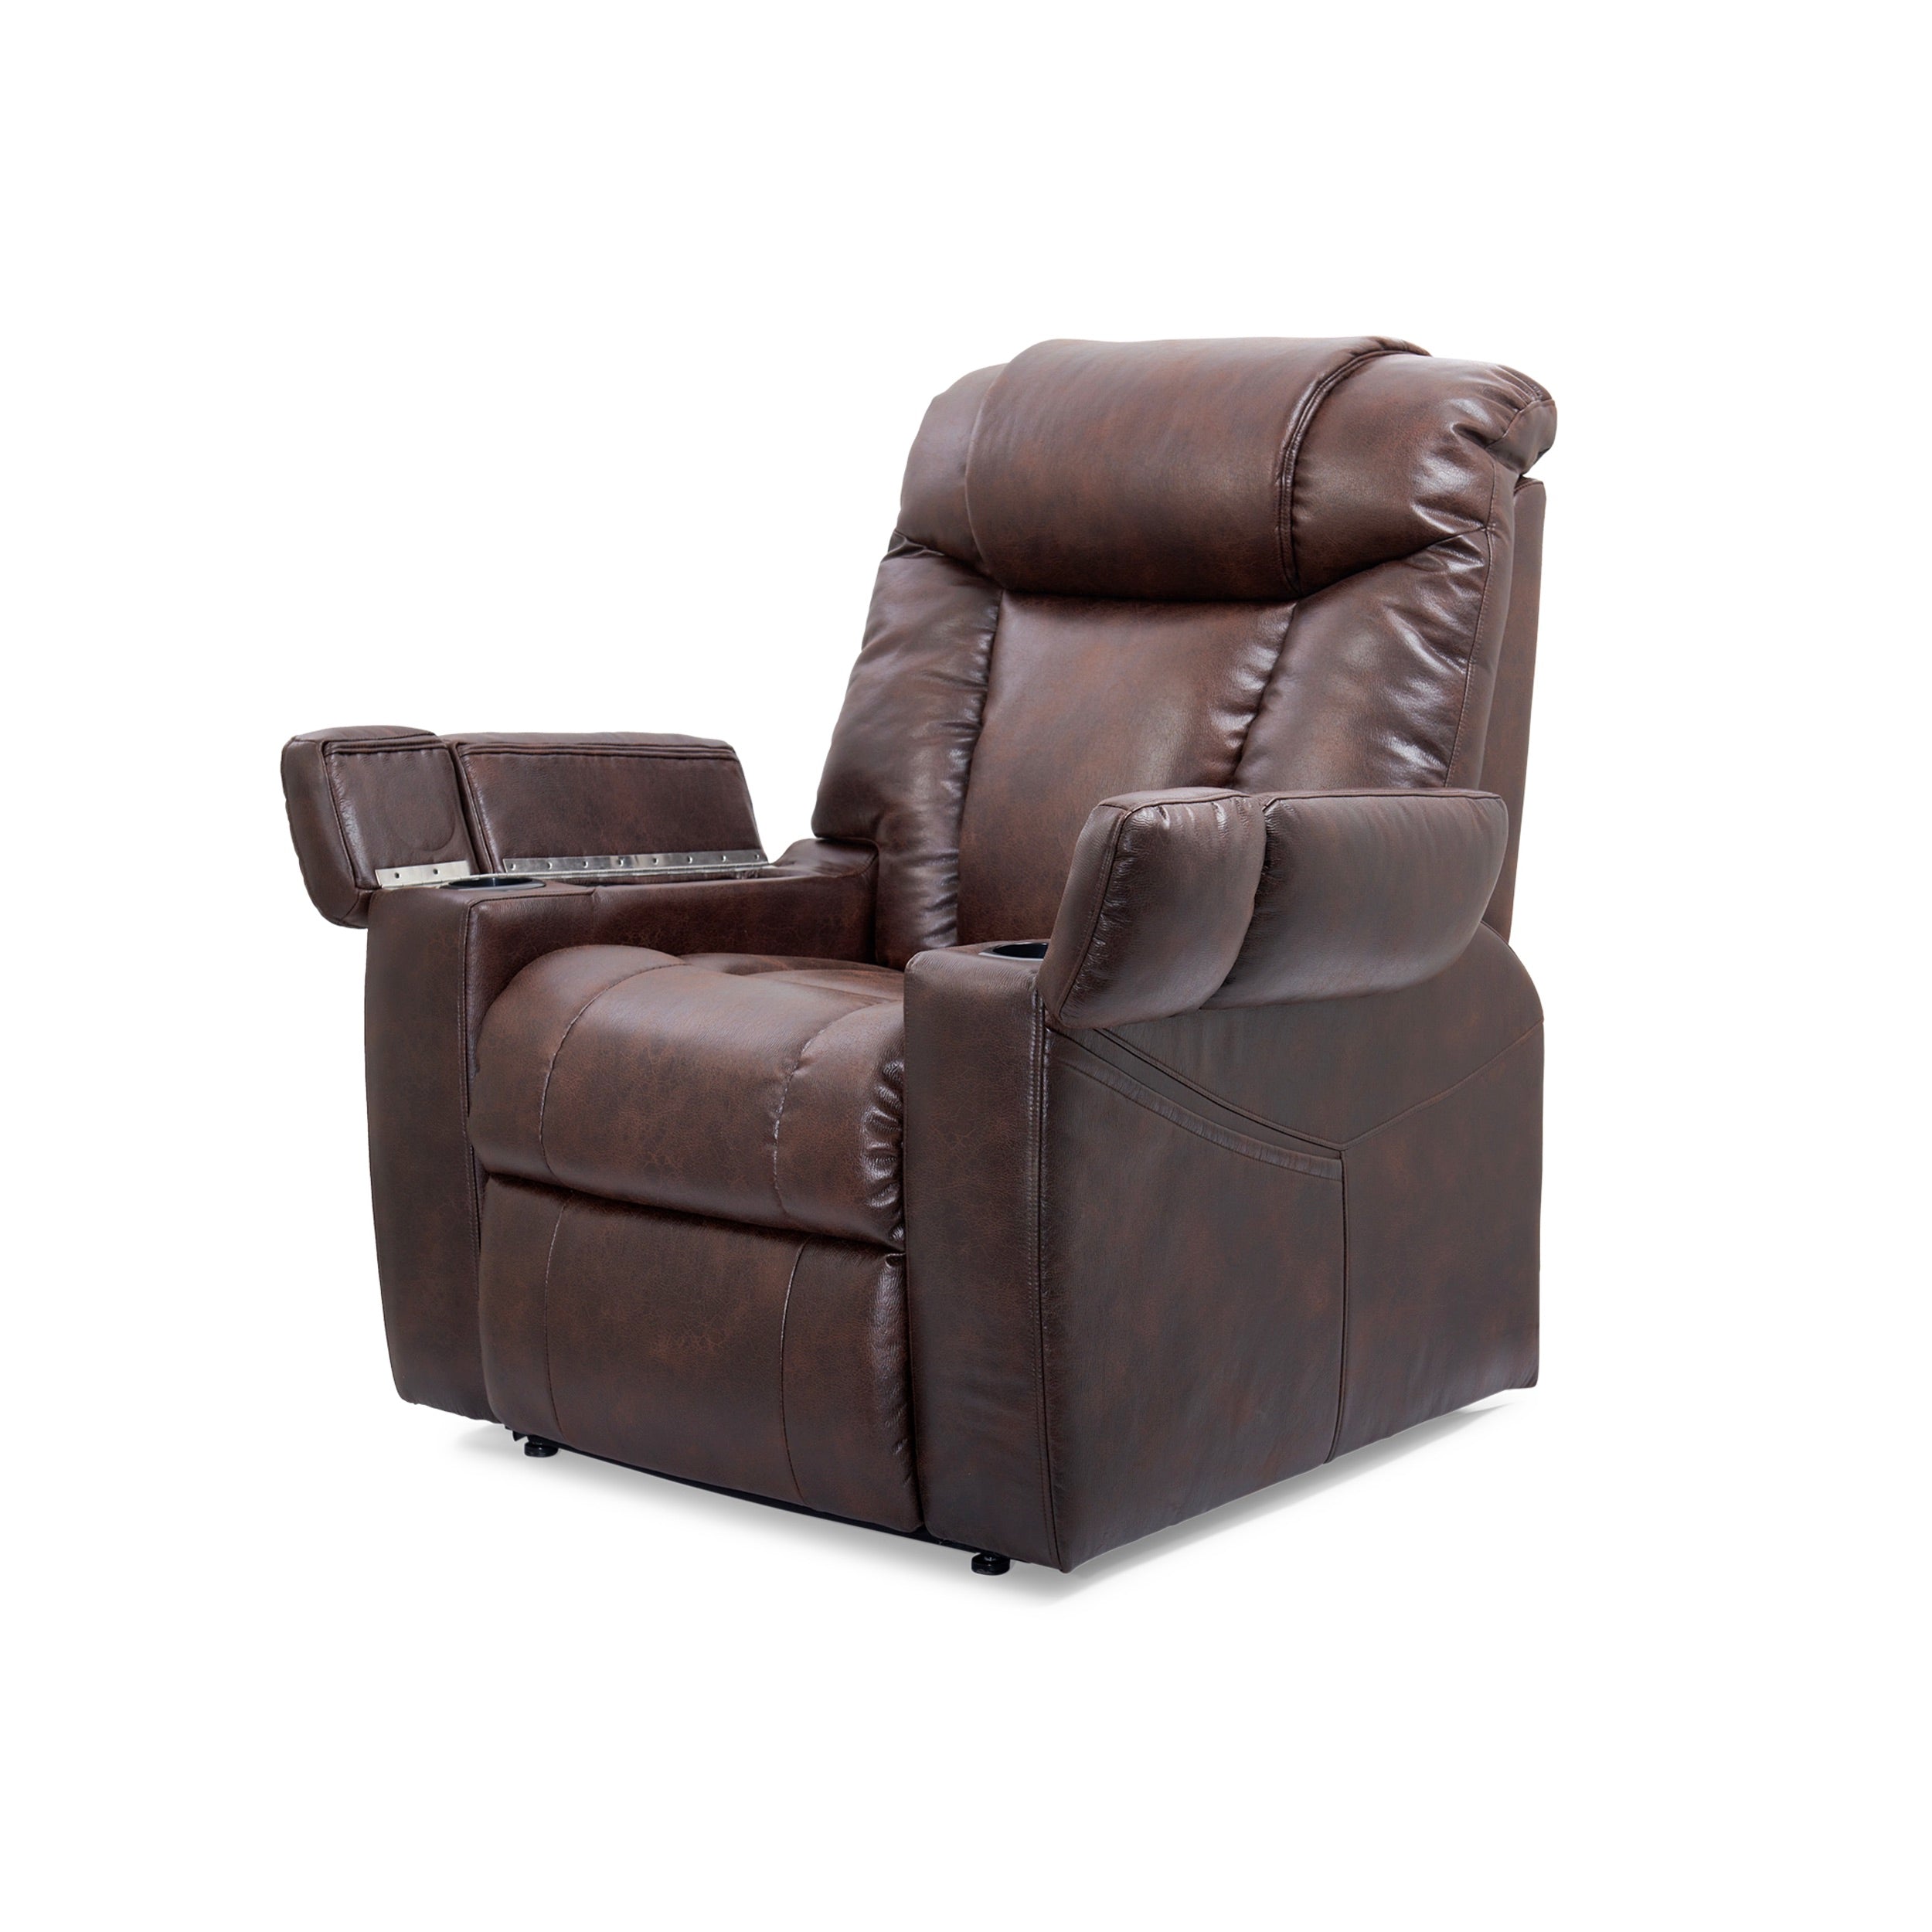 Rhodes Lift Chair Recliner with Heatwave Technology, storage spaces in arms